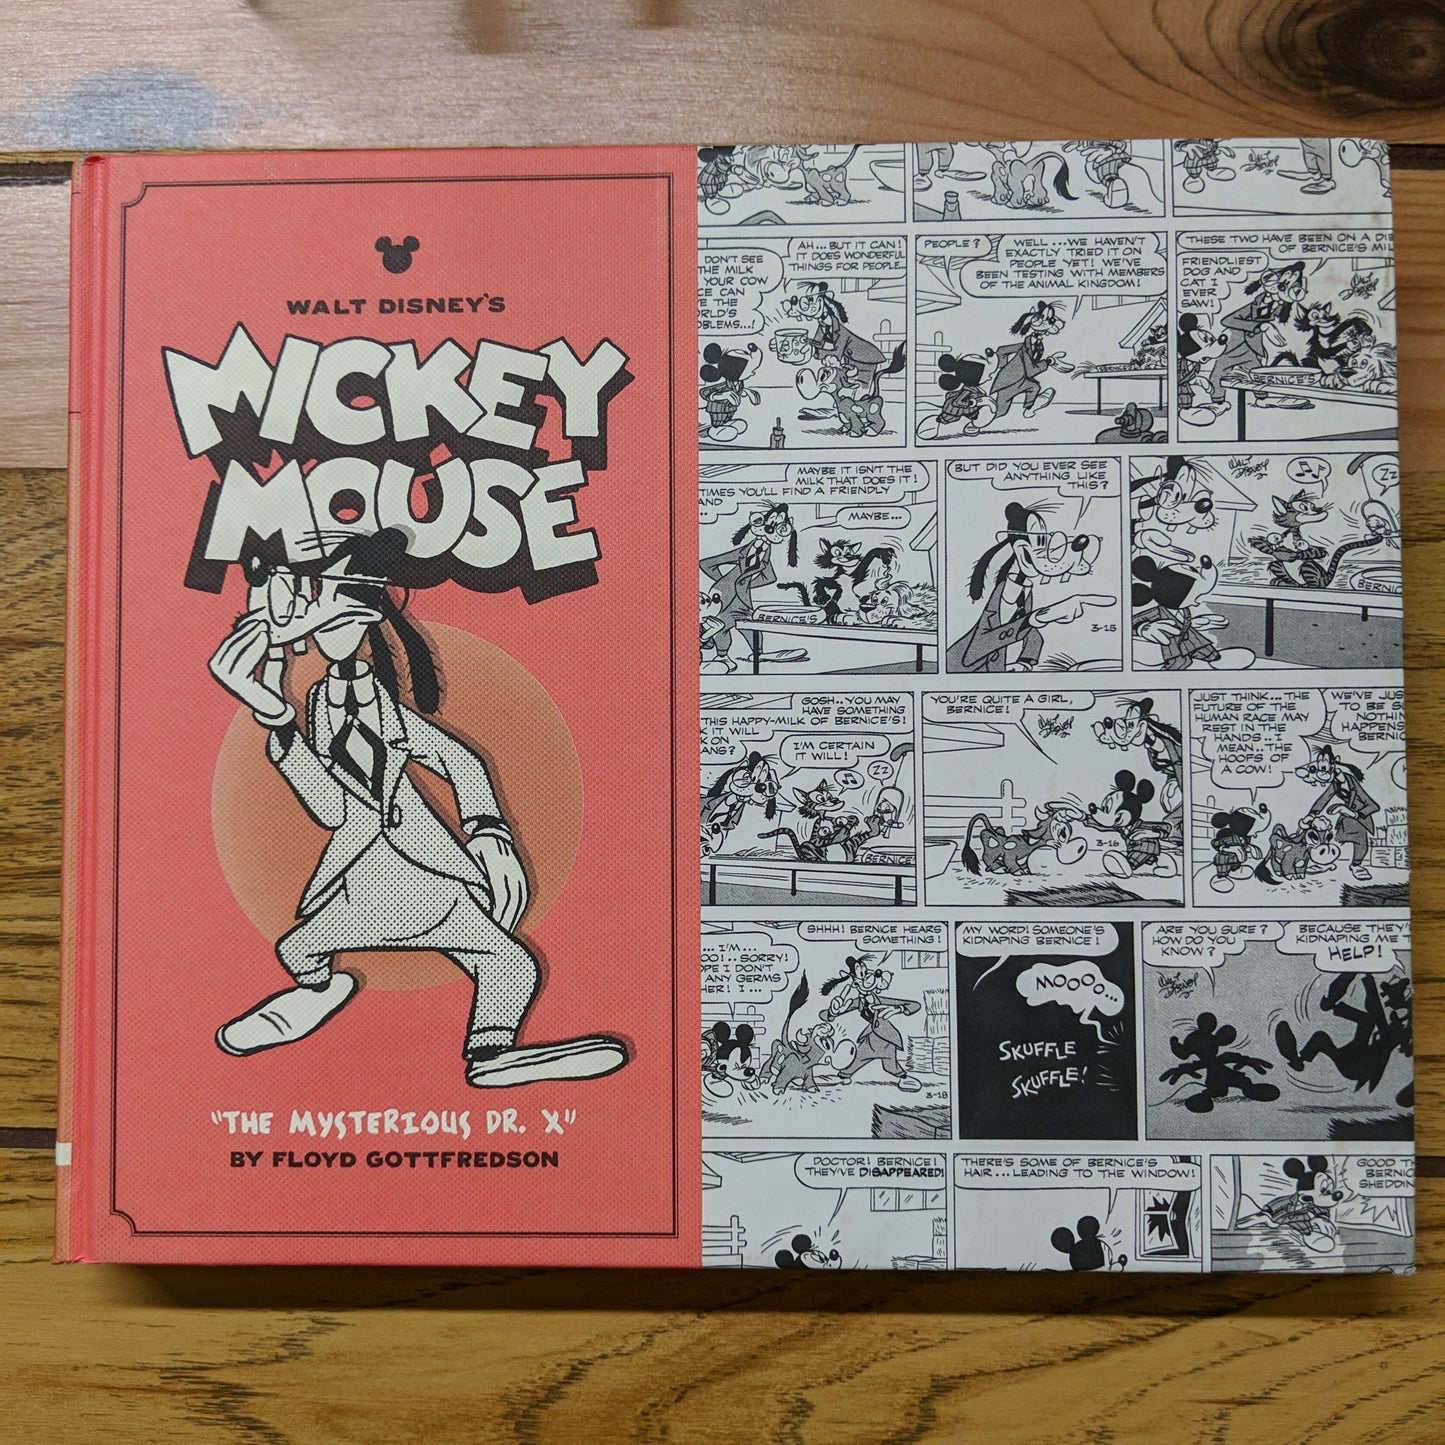 Mickey Mouse: "The Mysterious Dr. X"